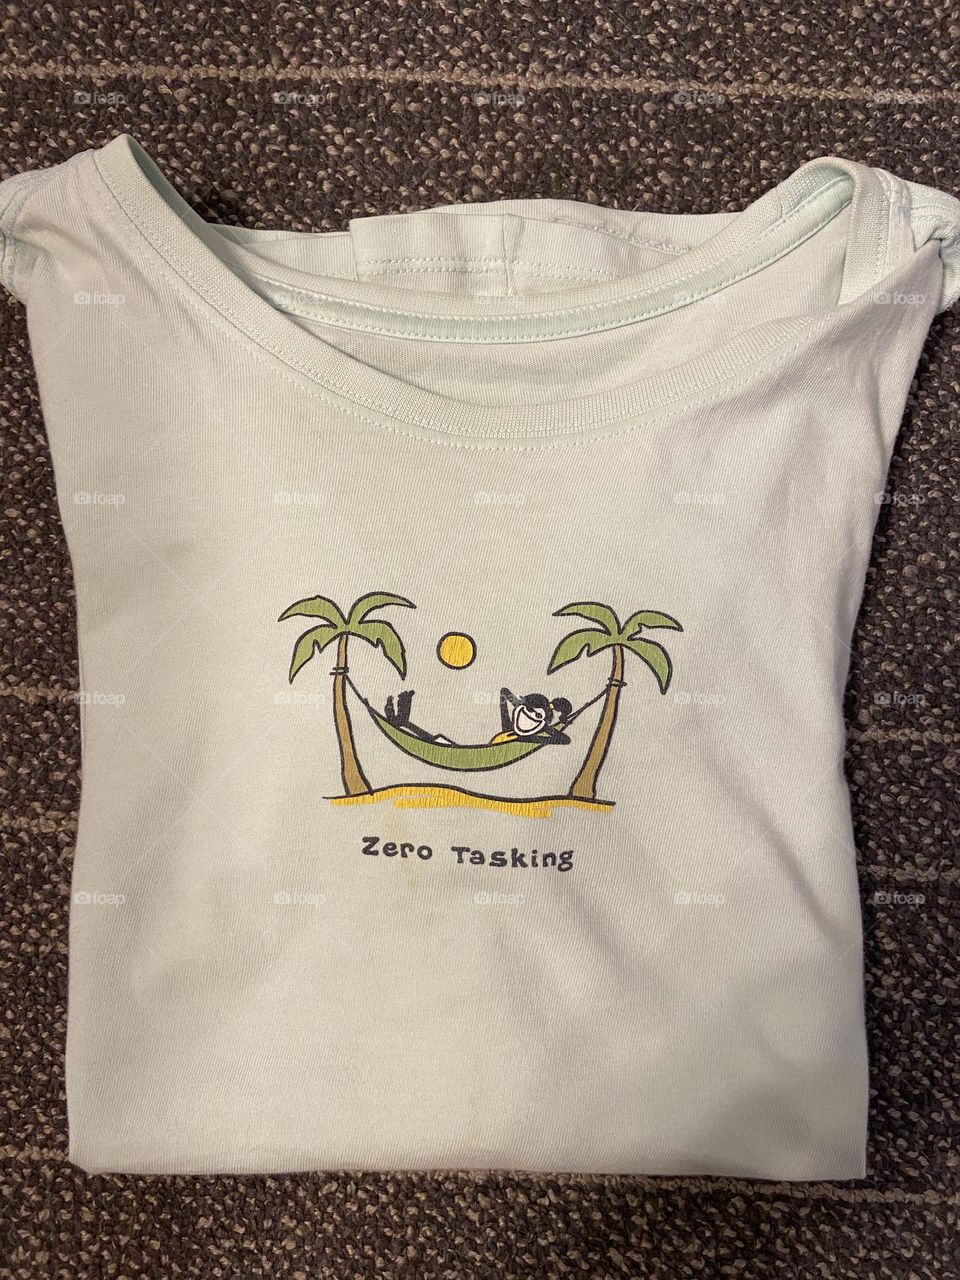 My favorite “Life is Good” T-shirt. Perfect for sending out happy summer vibes. In this busy world, we need to take time out to enjoy doing nothing. We all need to rest and recharge sometimes. 